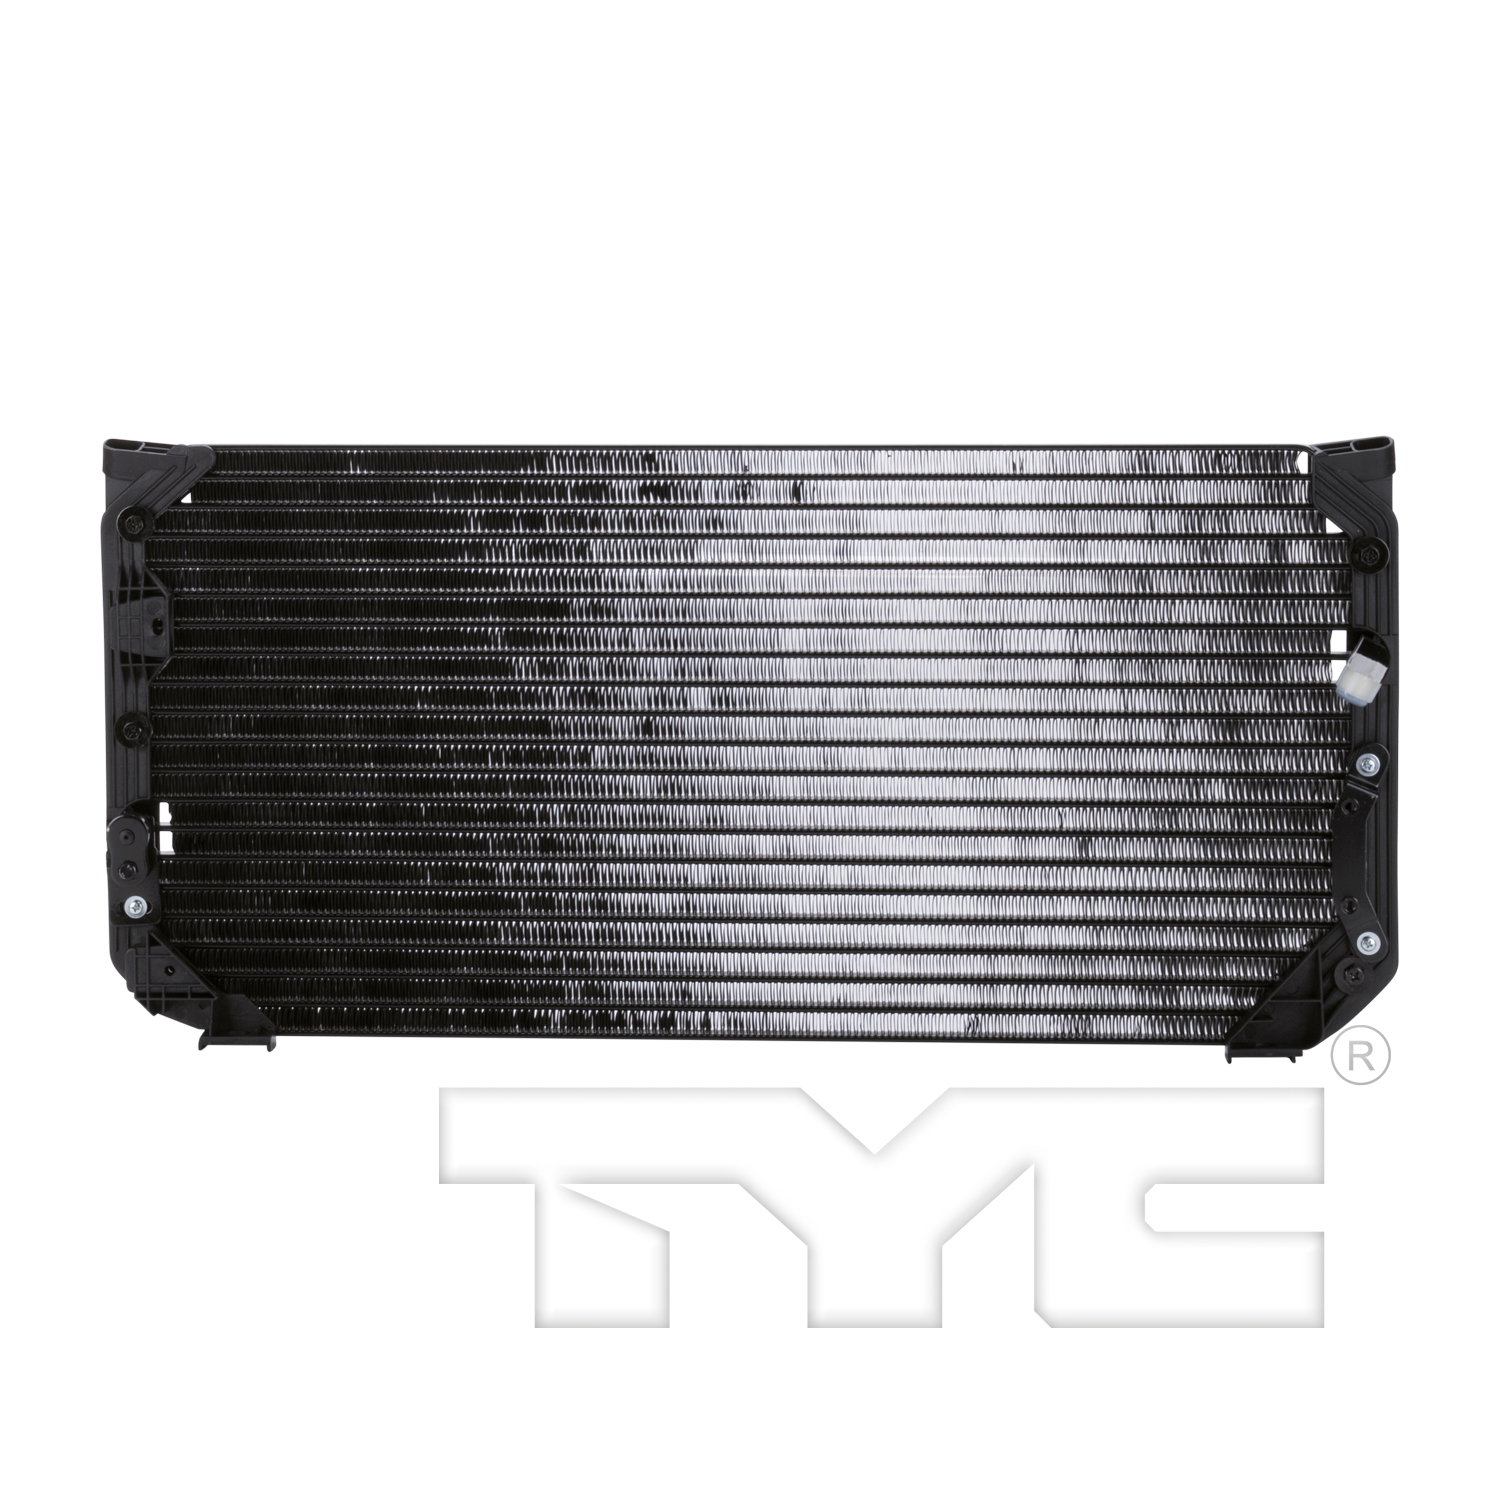 Aftermarket AC CONDENSERS for TOYOTA - COROLLA, COROLLA,94-97,Air conditioning condenser